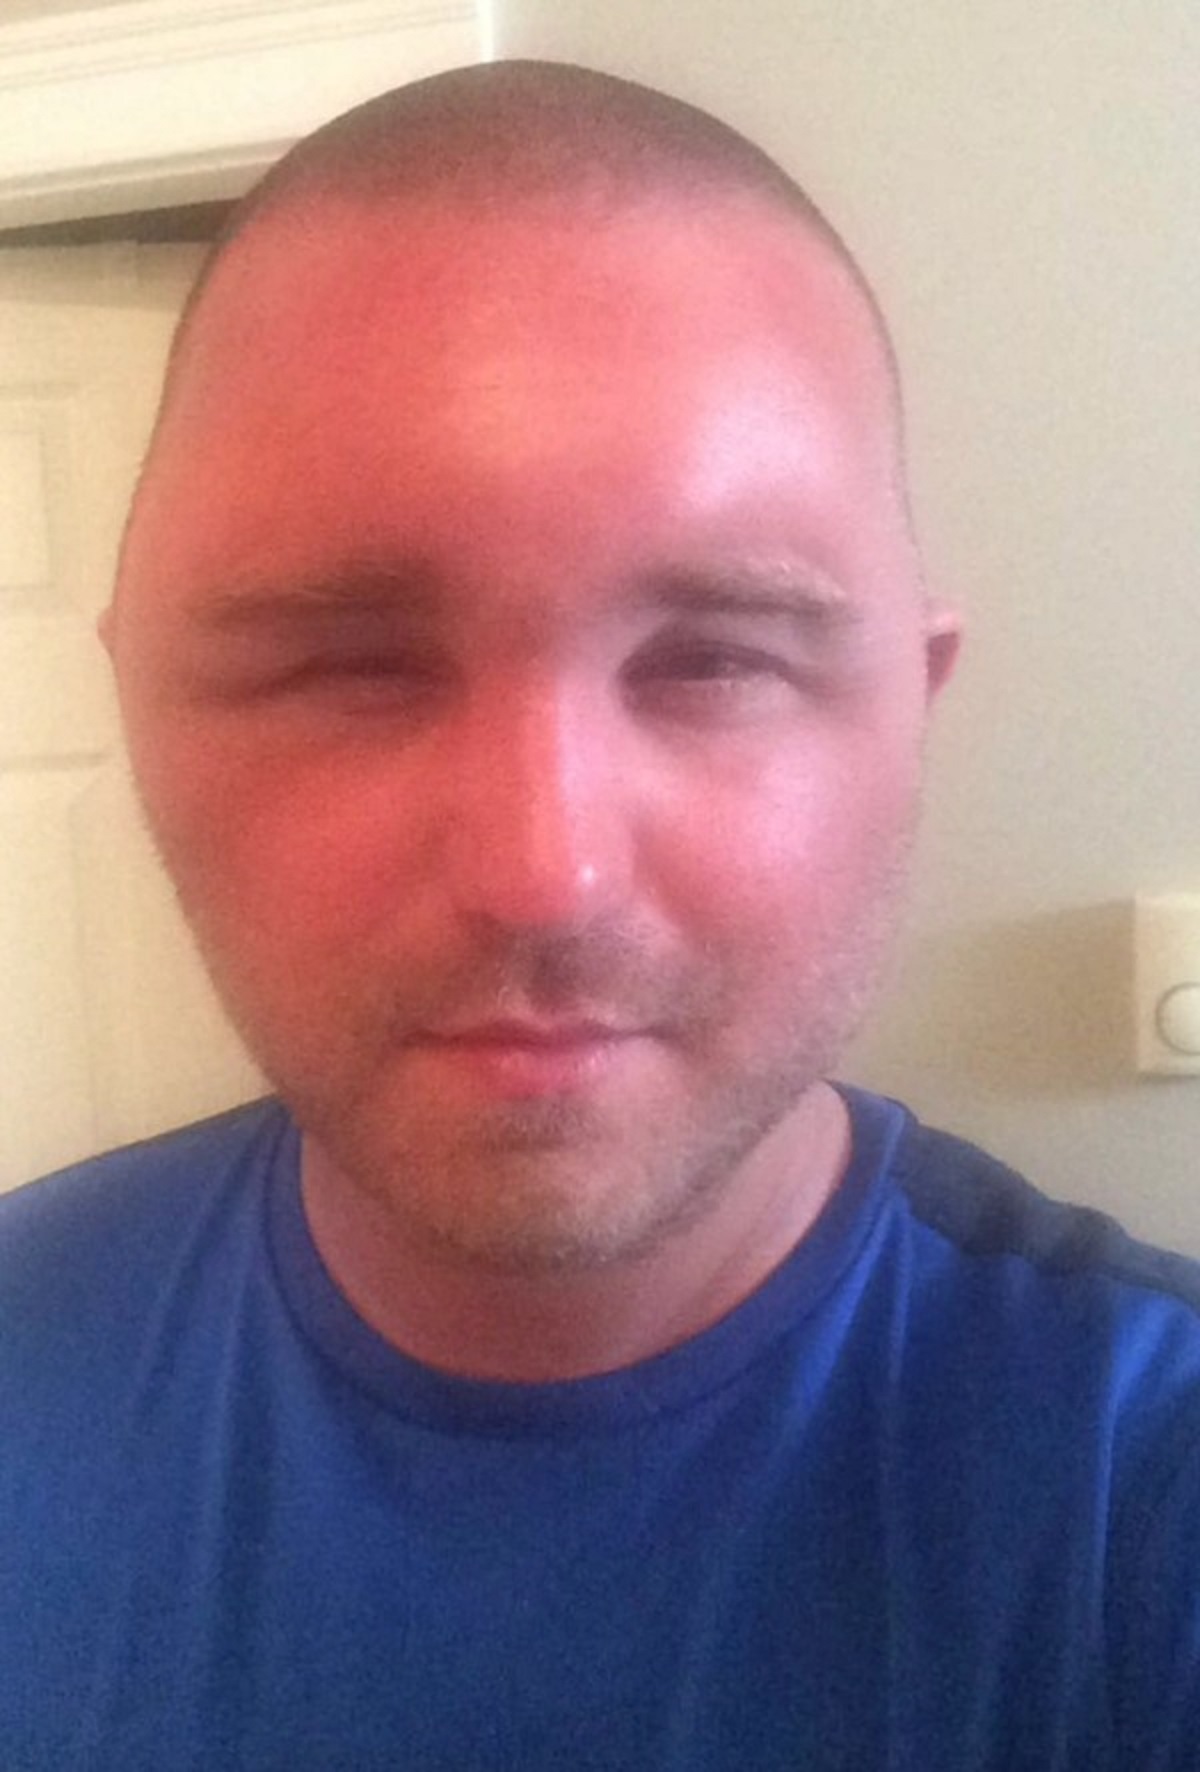 “Doc said it’s the worst swelling from a sunburn he’s ever seen.”